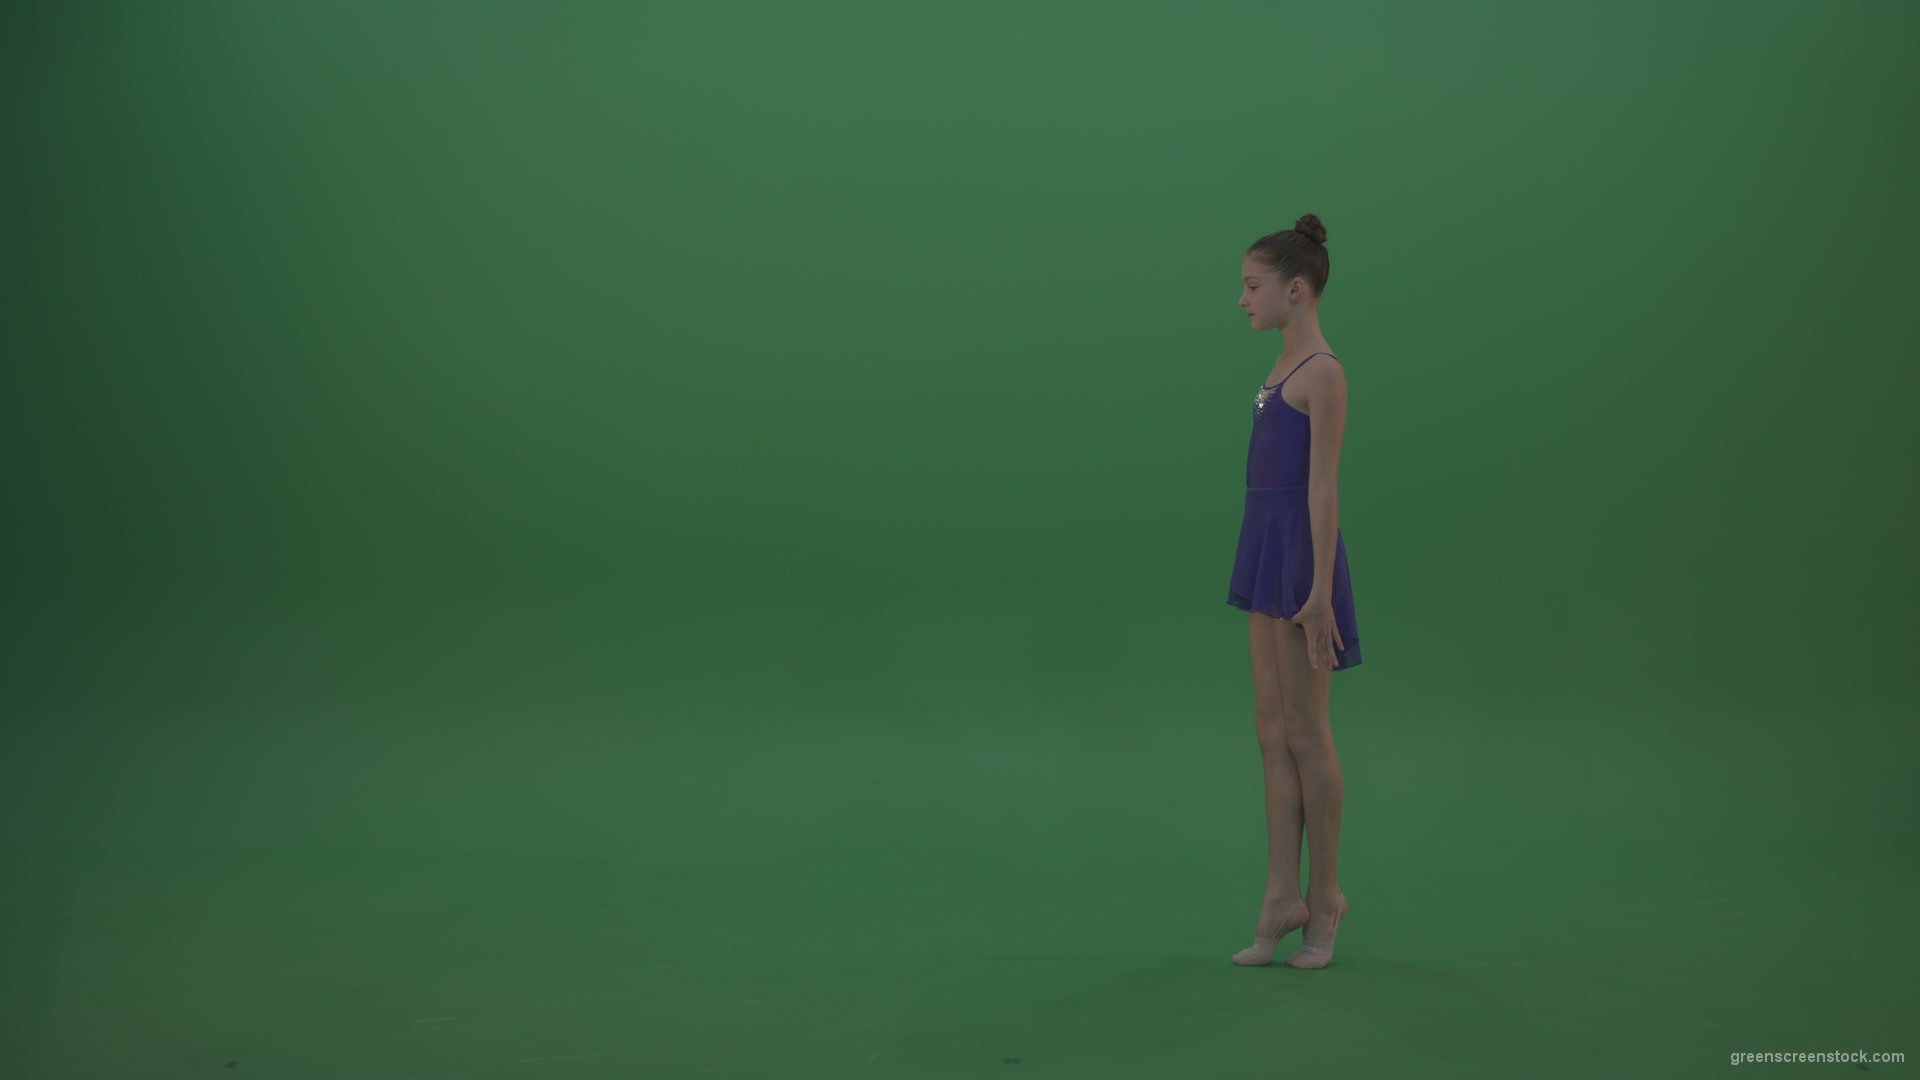 Cute_Athletic_Gymnast_Performing_Awesome_Split_Technique_Spin_Combination_With_Back_Handspring_On_Green_Screen_Chroma_Key_Wall_Background_001 Green Screen Stock